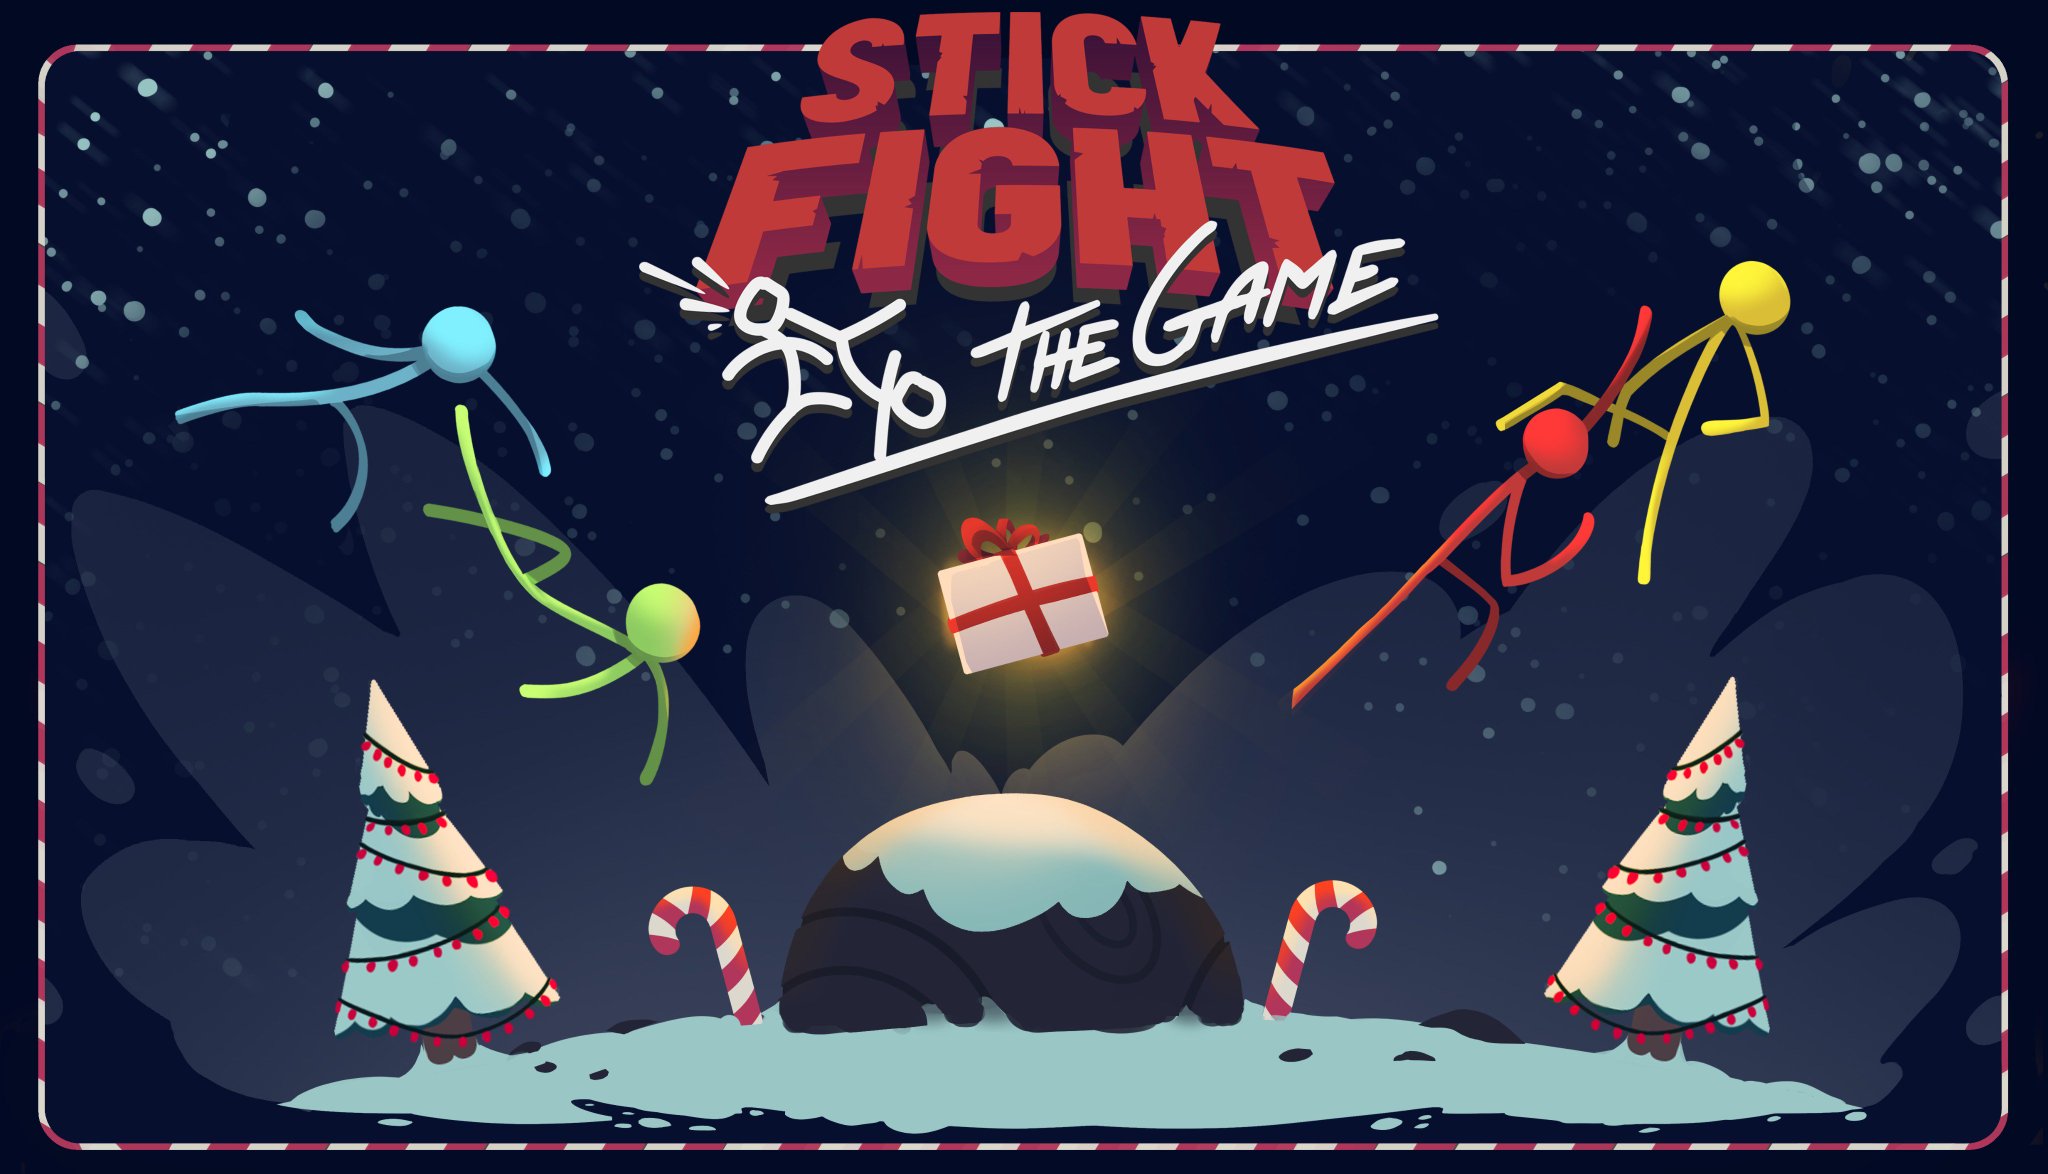 Play online - Stick Fight: The Game